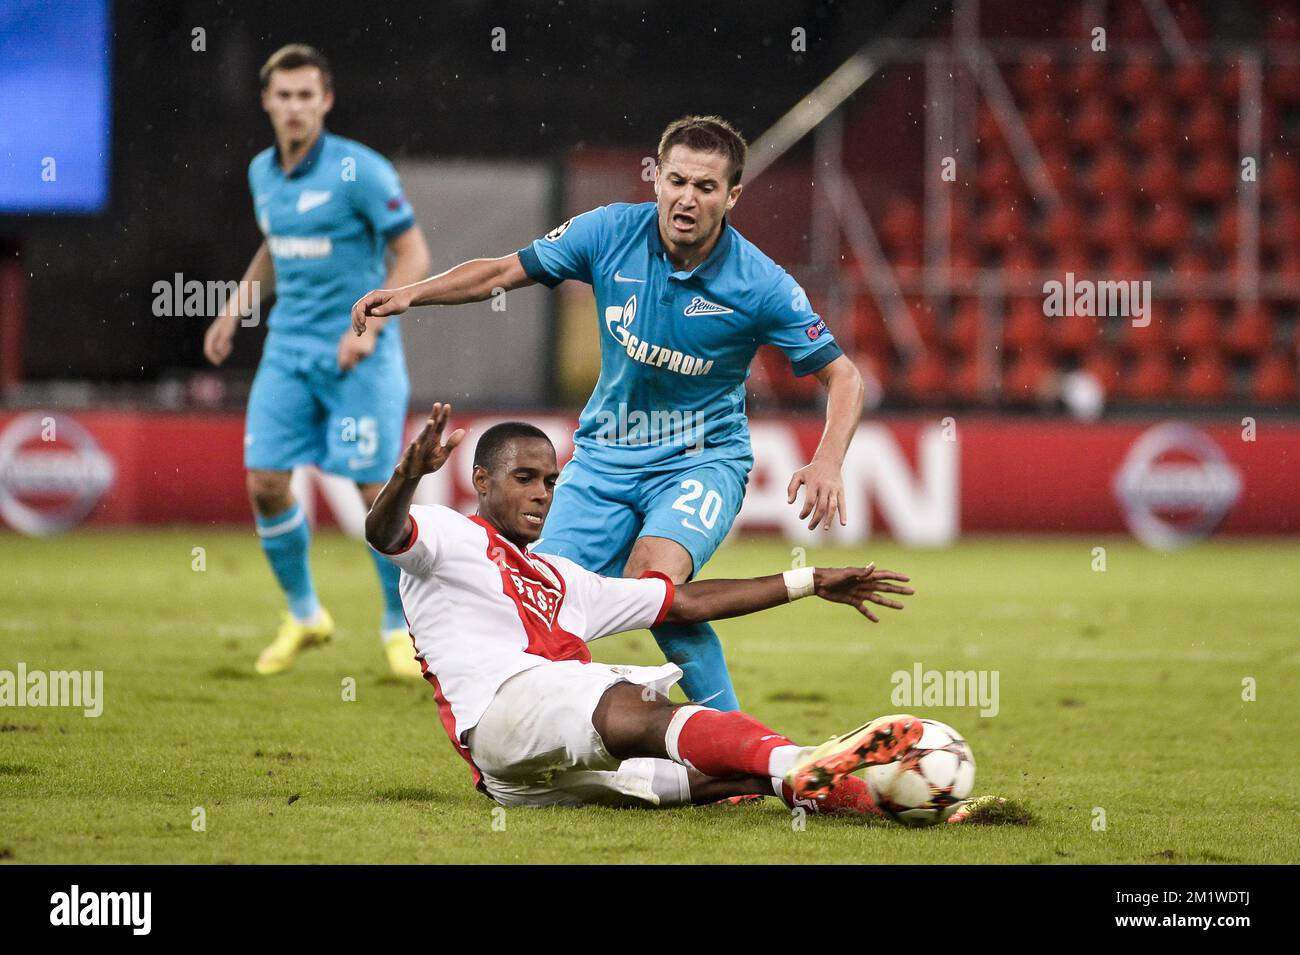 Standard's new player Ricardo Faty and Zenit's Viktor Fayzulin fight for the ball during the first leg match between Belgian first division soccer team Standard de Liege and Russian team FC Zenit Saint Petersburg in the playoffs for the UEFA Champions League competition, Wednesday 20 August 2014, in Liege. Stock Photo